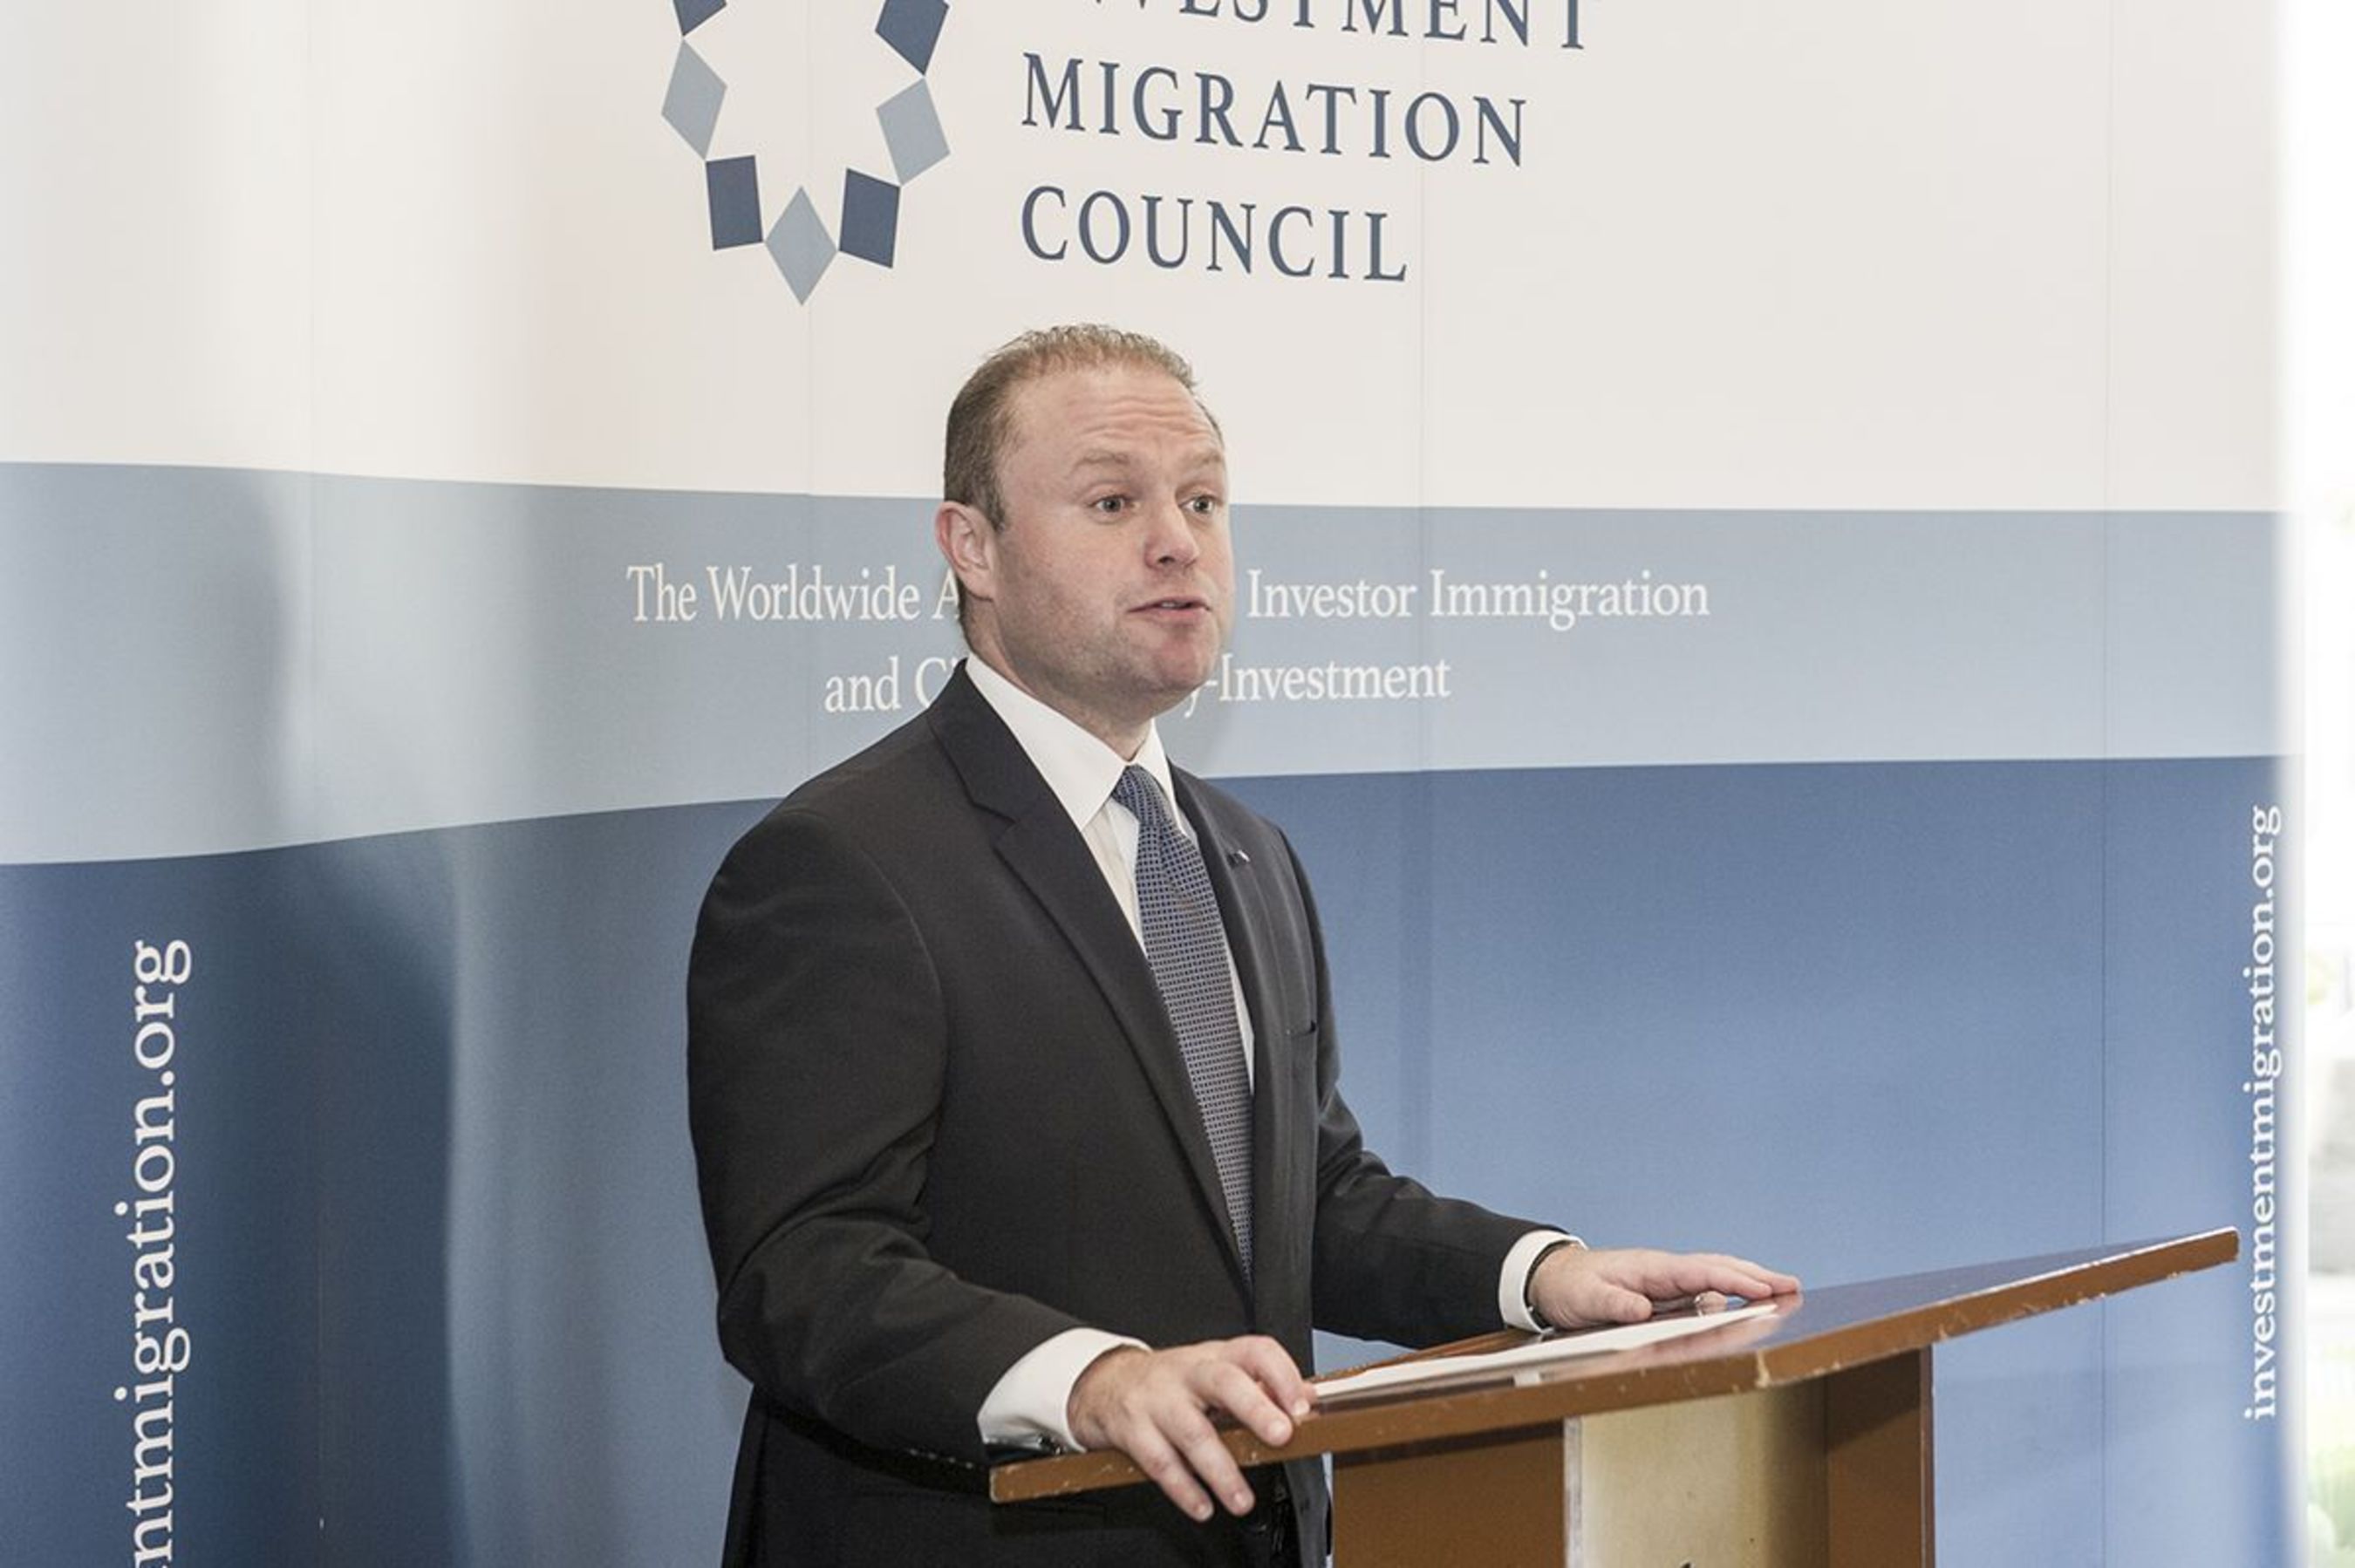 The Hon. Dr. Joseph Muscat, Prime Minister of the Republic of Malta speaking at the first Investment Migration Council Membersâeuro(TM) Lunch in Singapore. (PRNewsFoto/IMC)